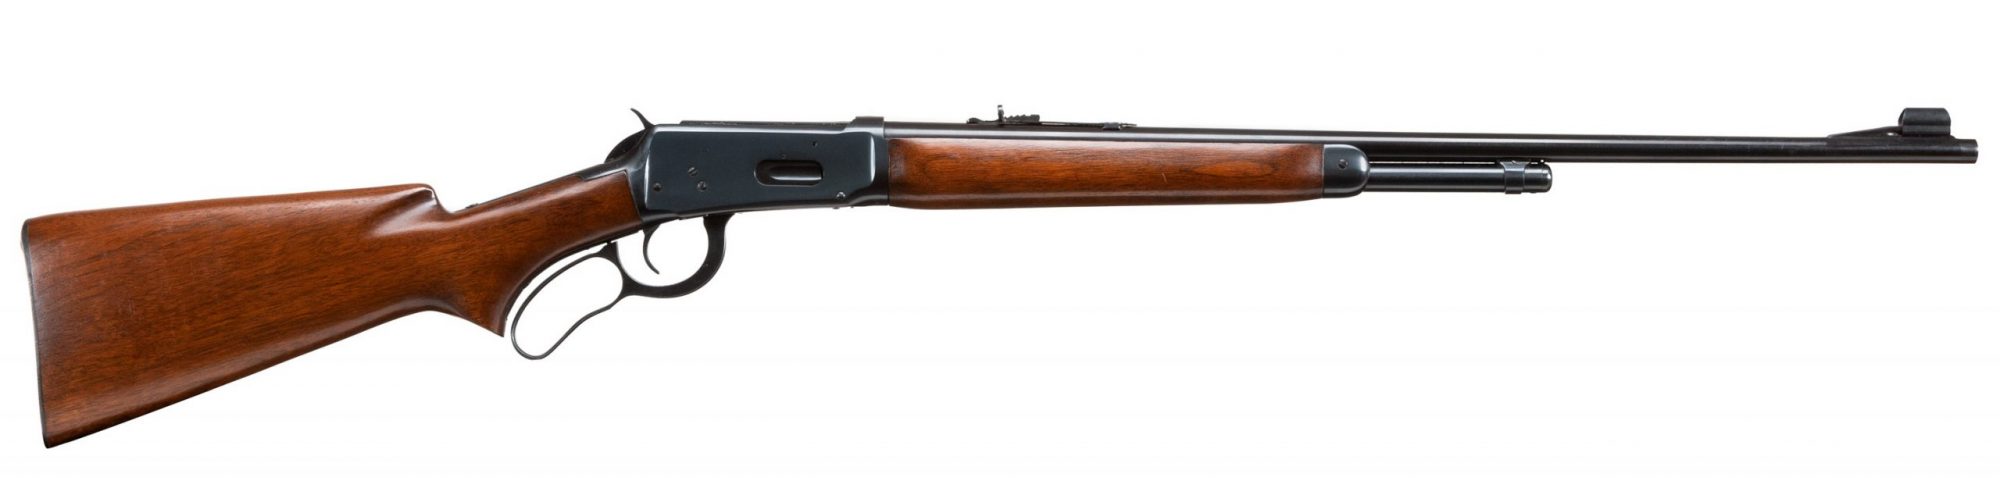 Photo of a used Winchester Model 64, sold as-is through Turnbull Restoration